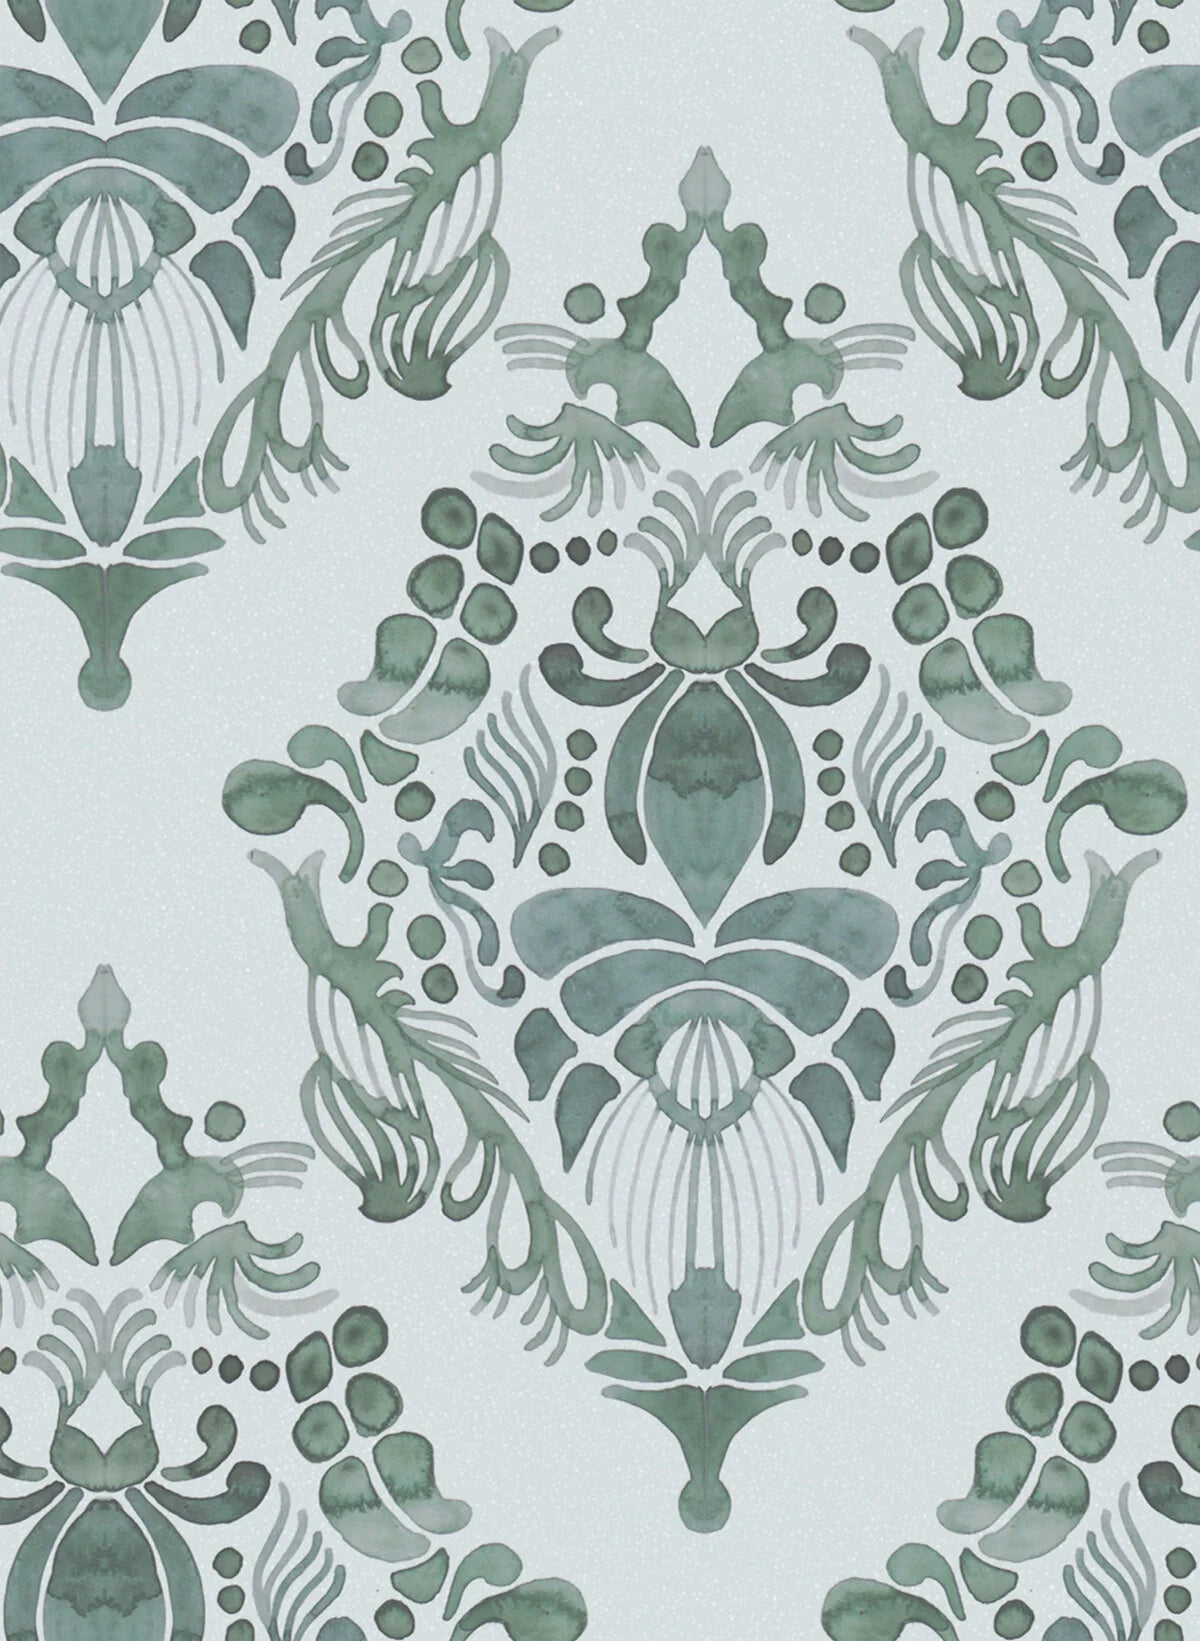 A classic wallpaper medallion created in watercolor that provides a vivid impression.